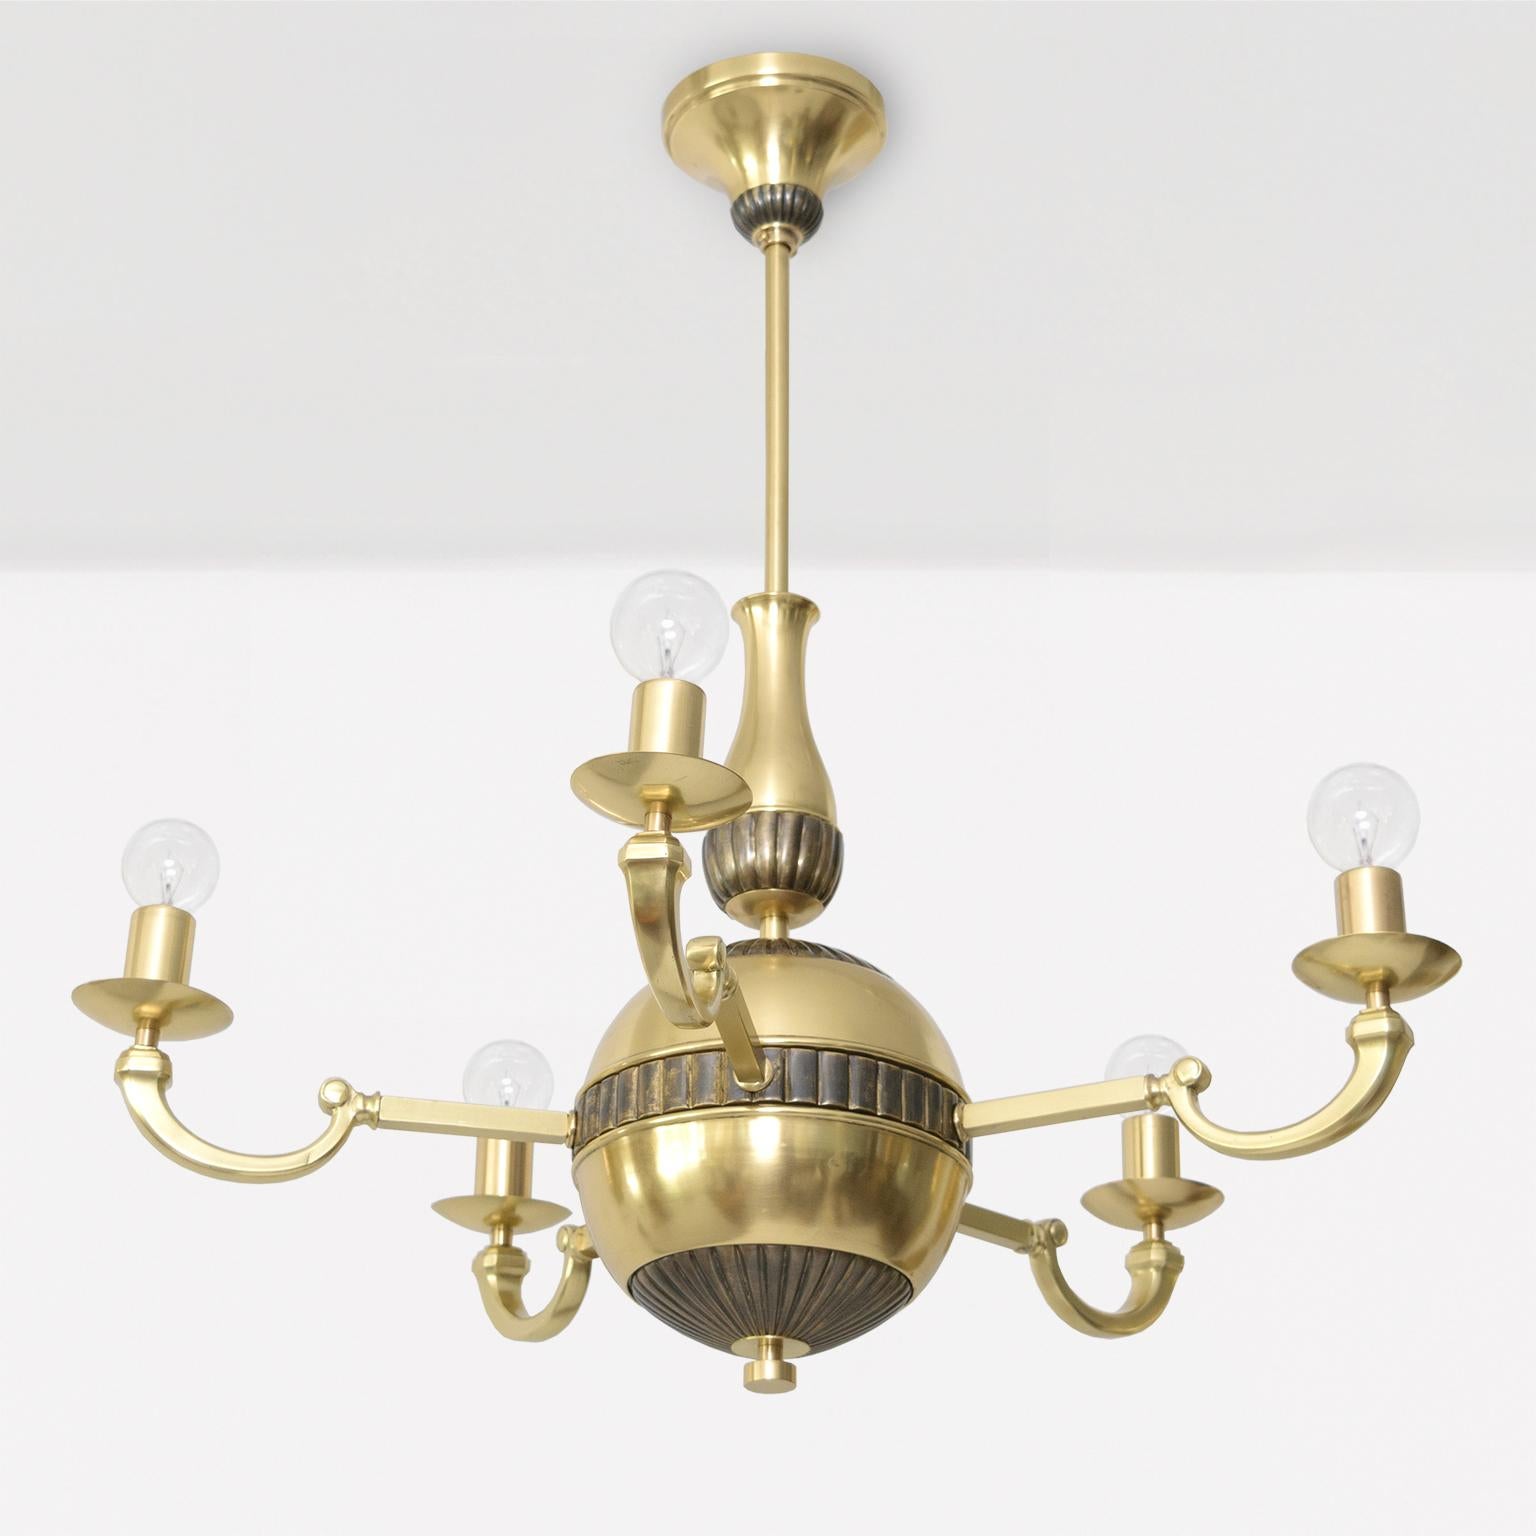 Mid-20th Century Swedish Art Deco Brass 5-arm Chandelier with patinated details  For Sale